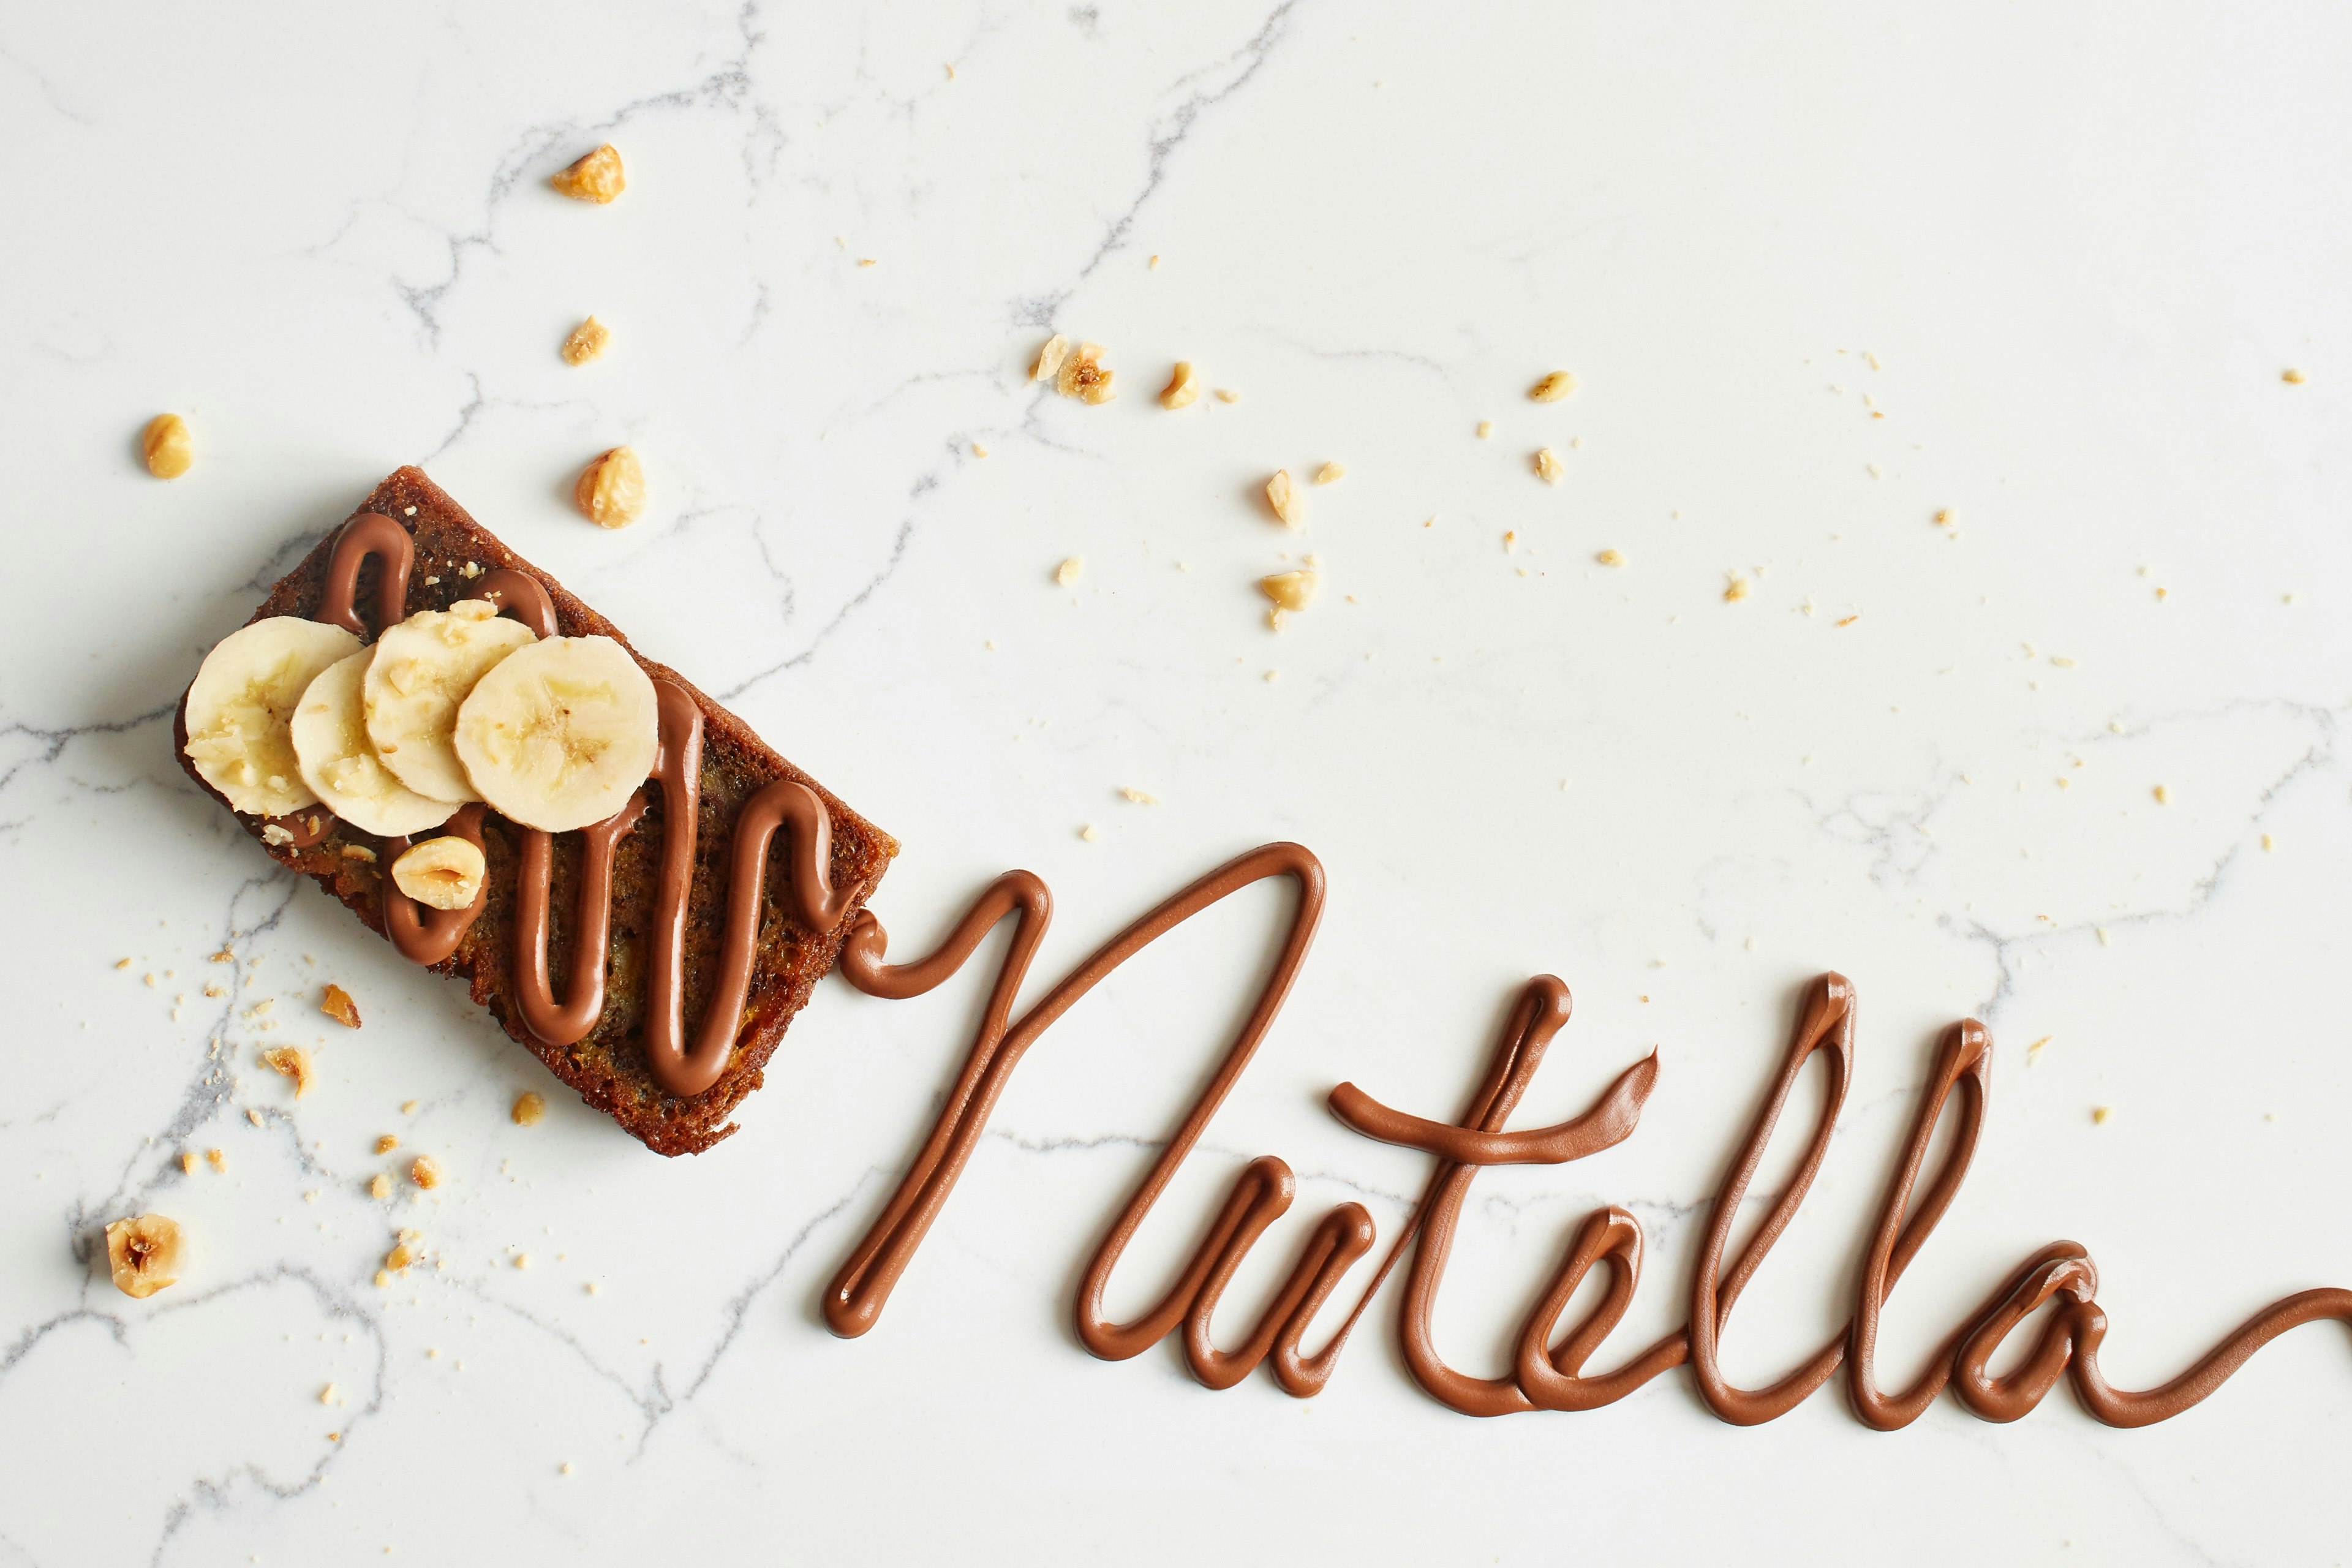 A piece of brioche topped with sliced bananas, hazelnuts, and Nutella, with the word "Nutella" written in Nutella